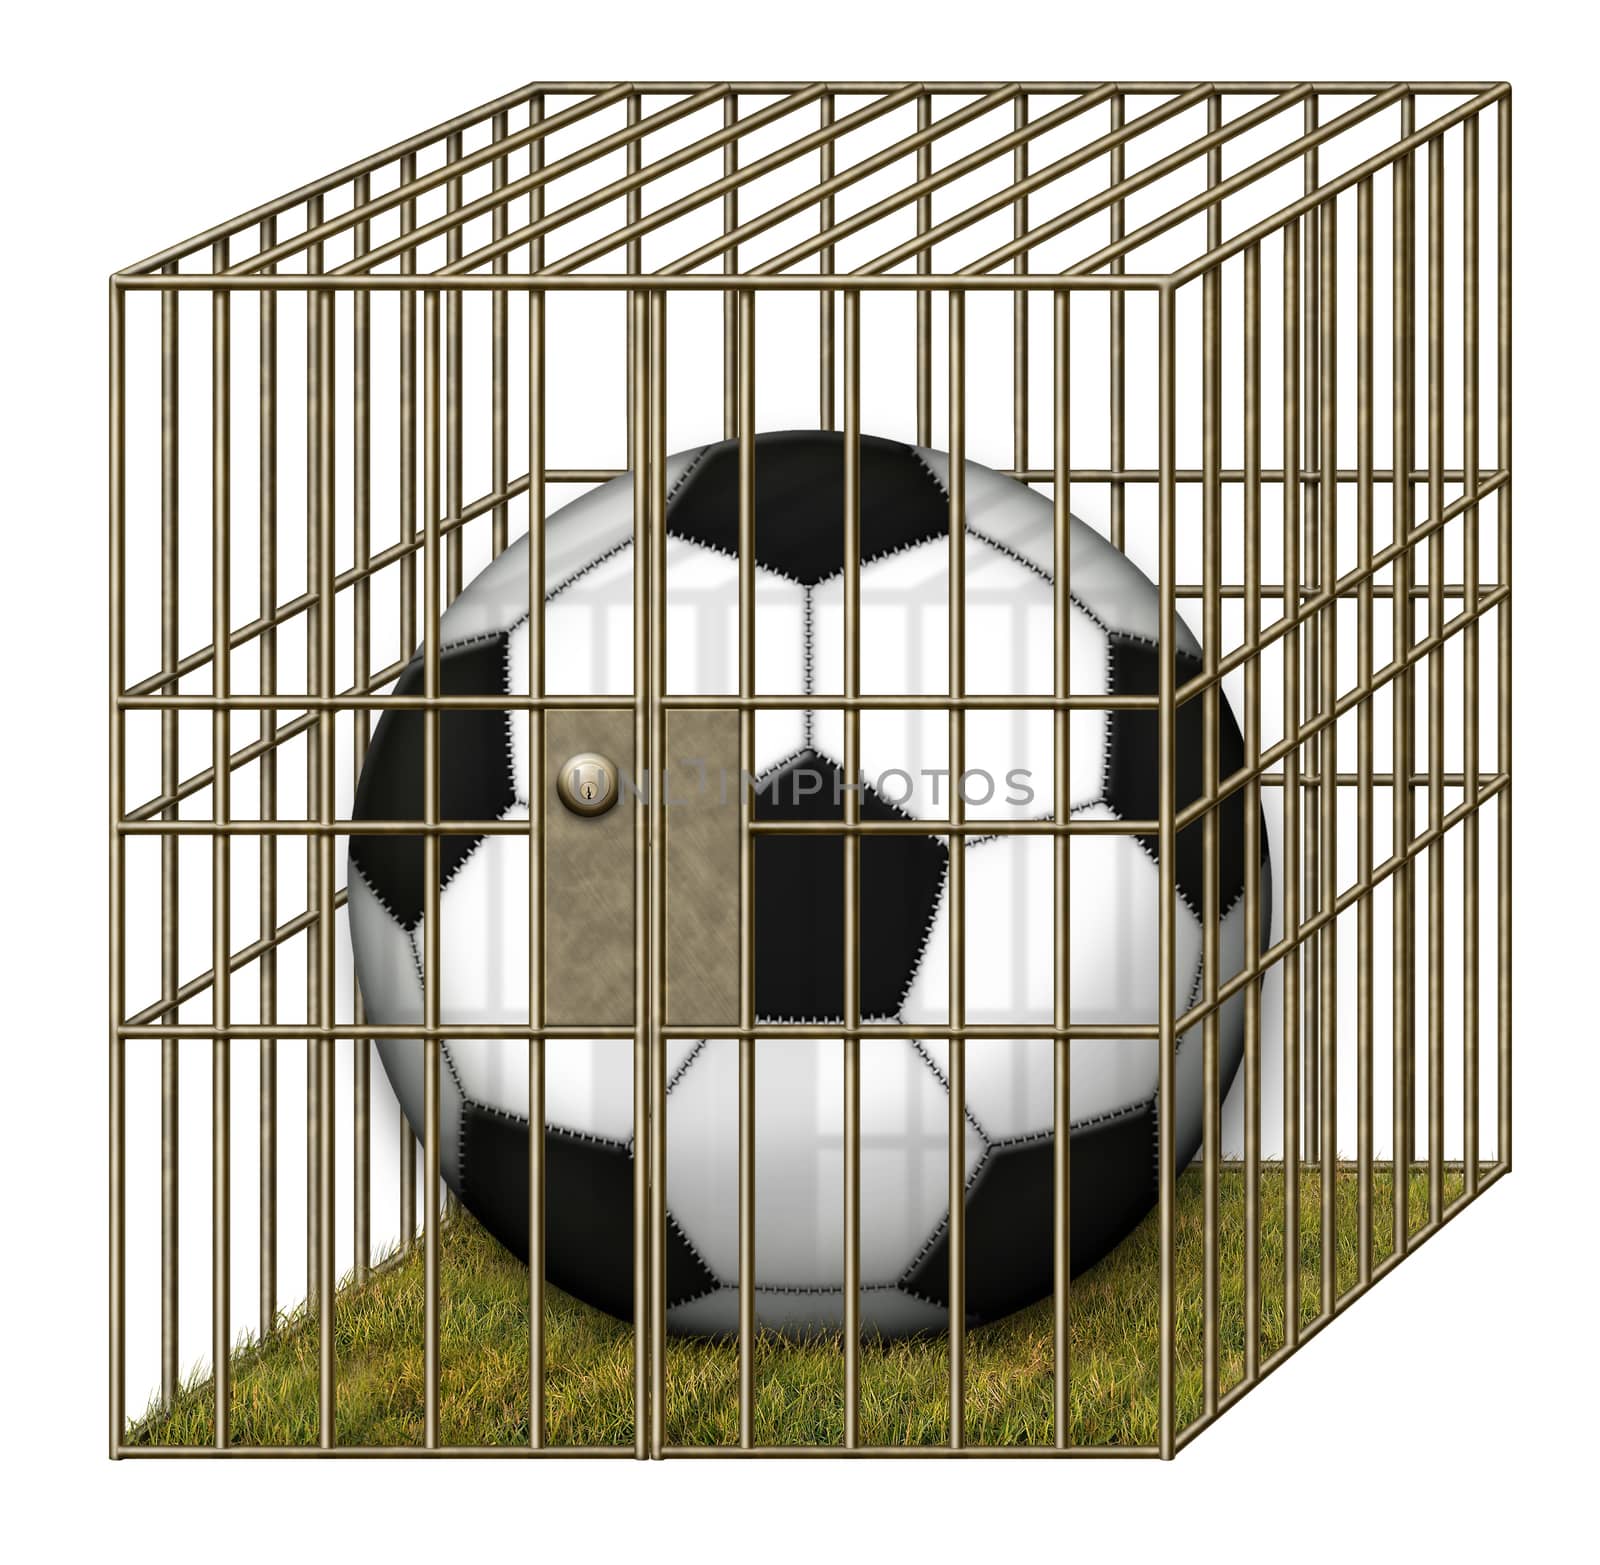 Illustration of a soccer ball in a jail cell.